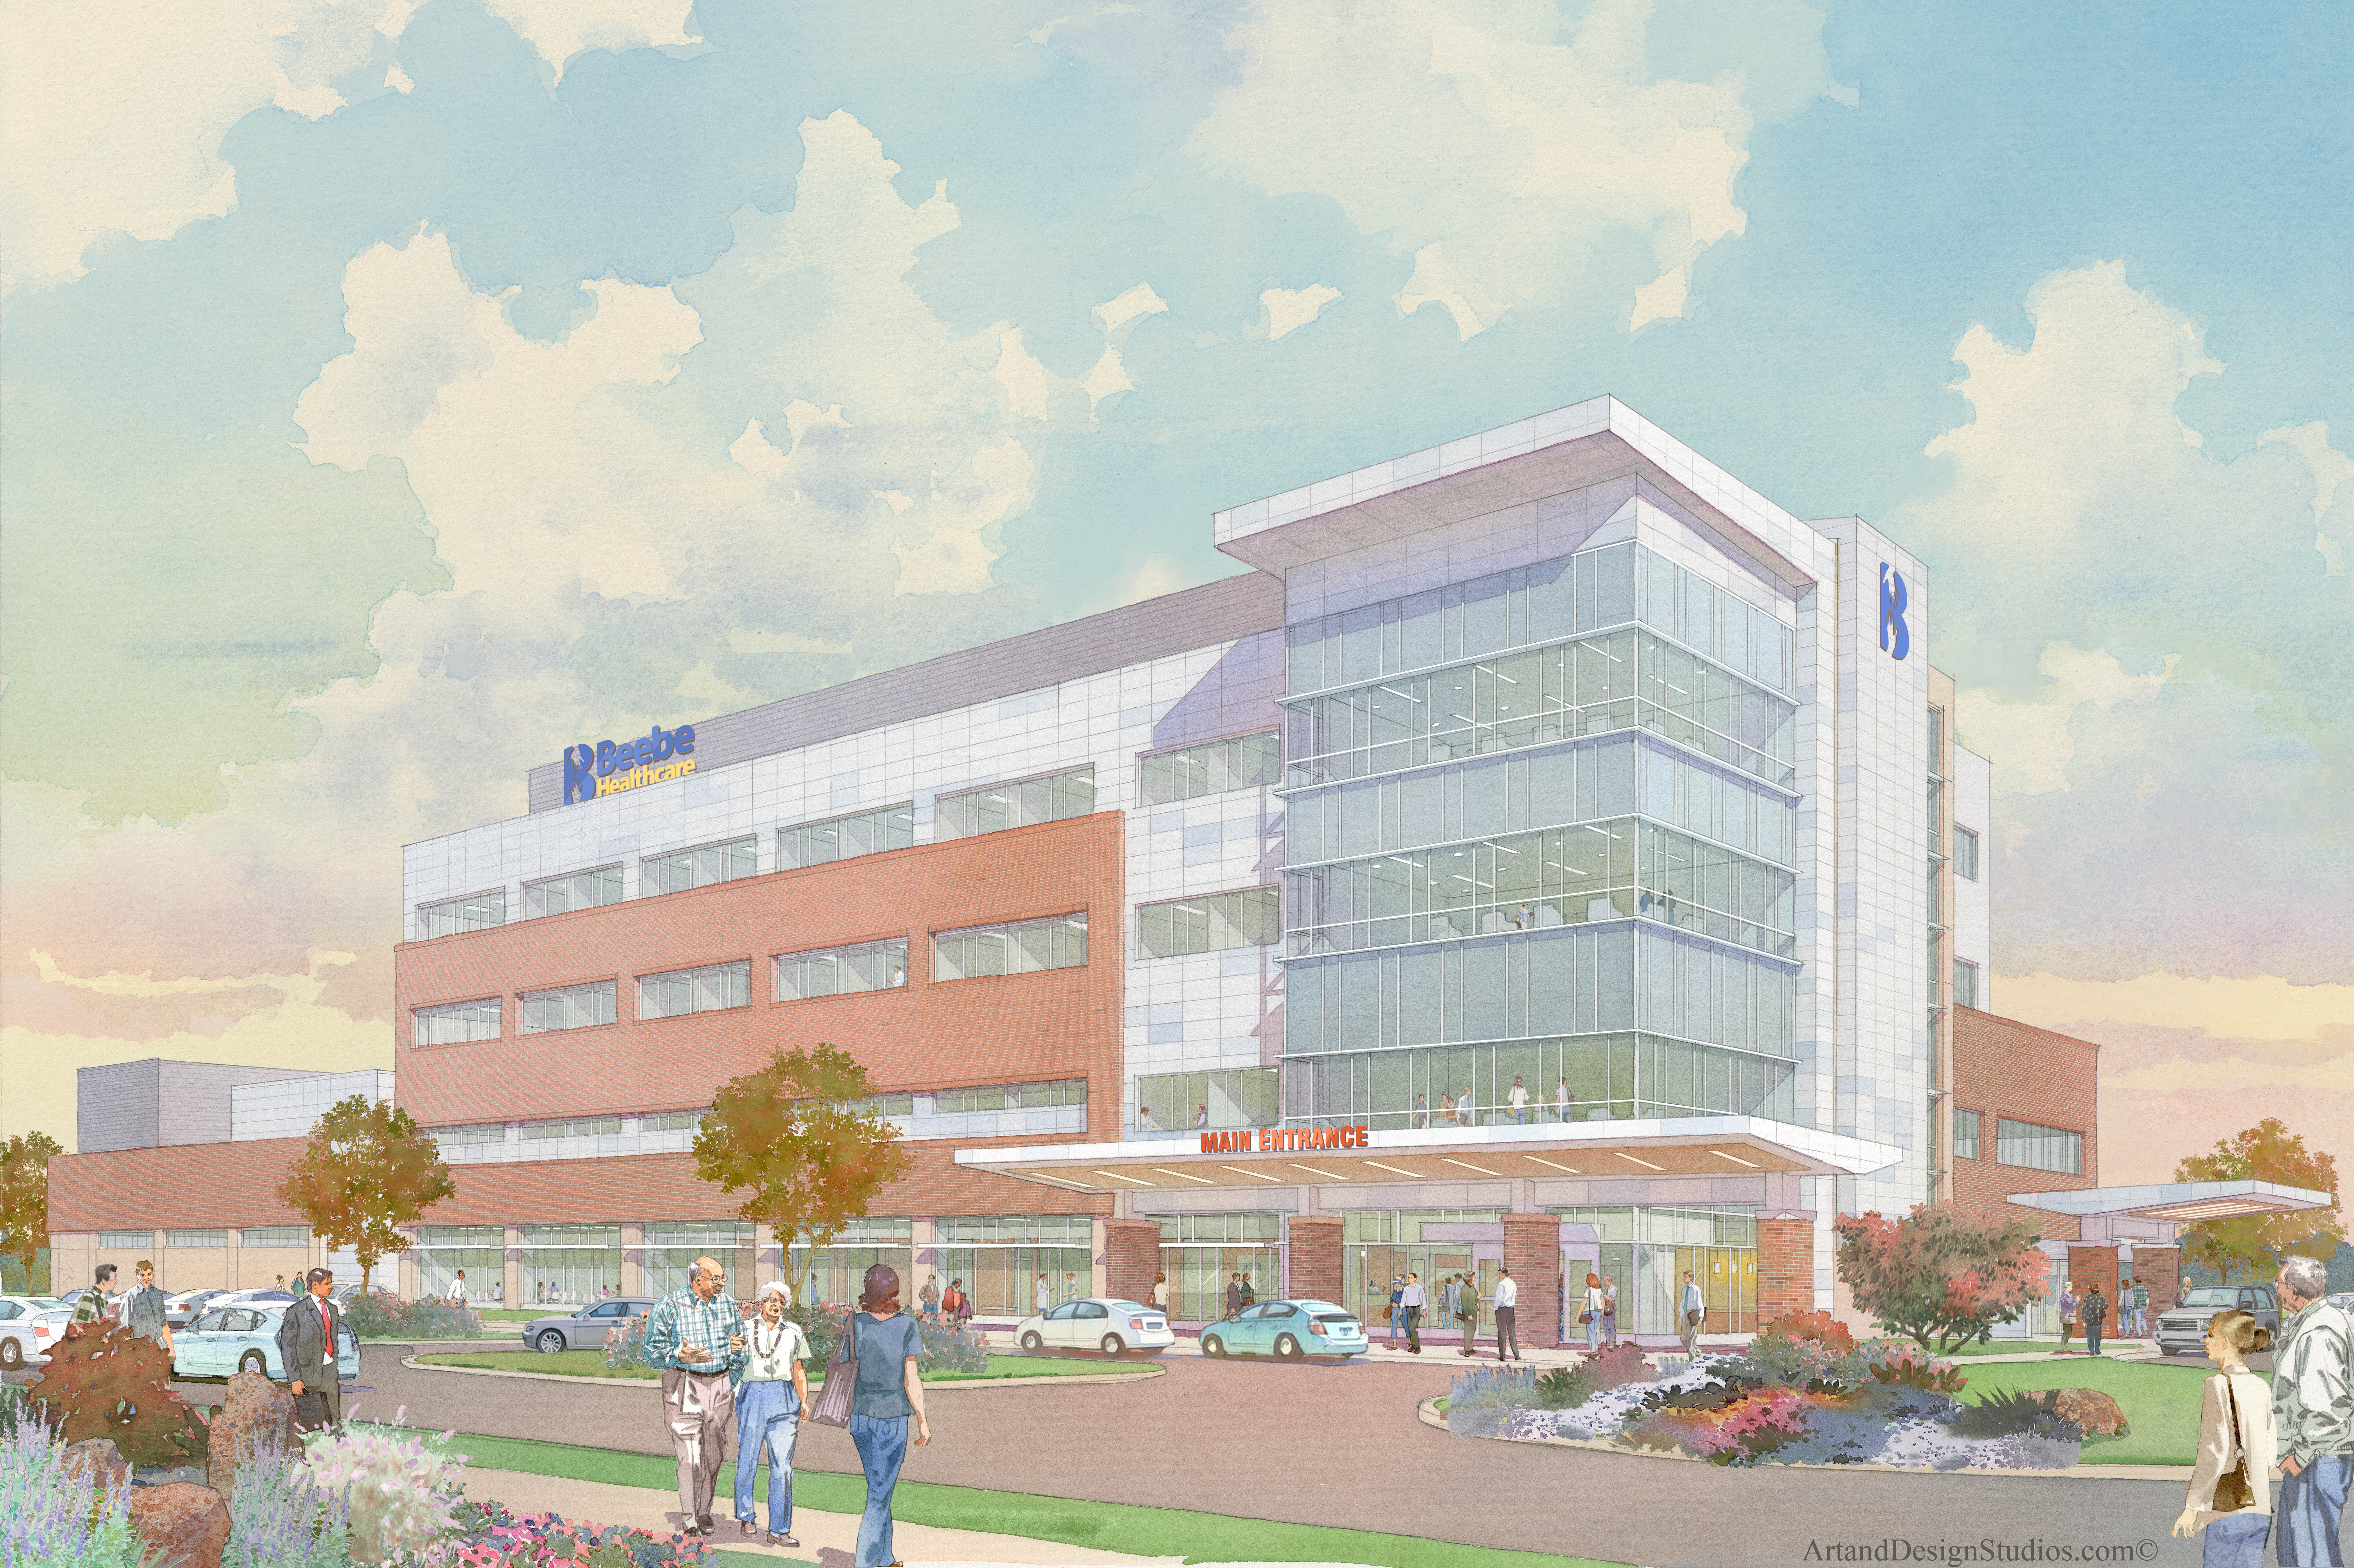 A rendering of the new Specialty Surgical Hospital at the Rehoboth Health Campus. Construction will begin May 15 after the groundbreaking ceremony with an estimated completion of summer 2022.